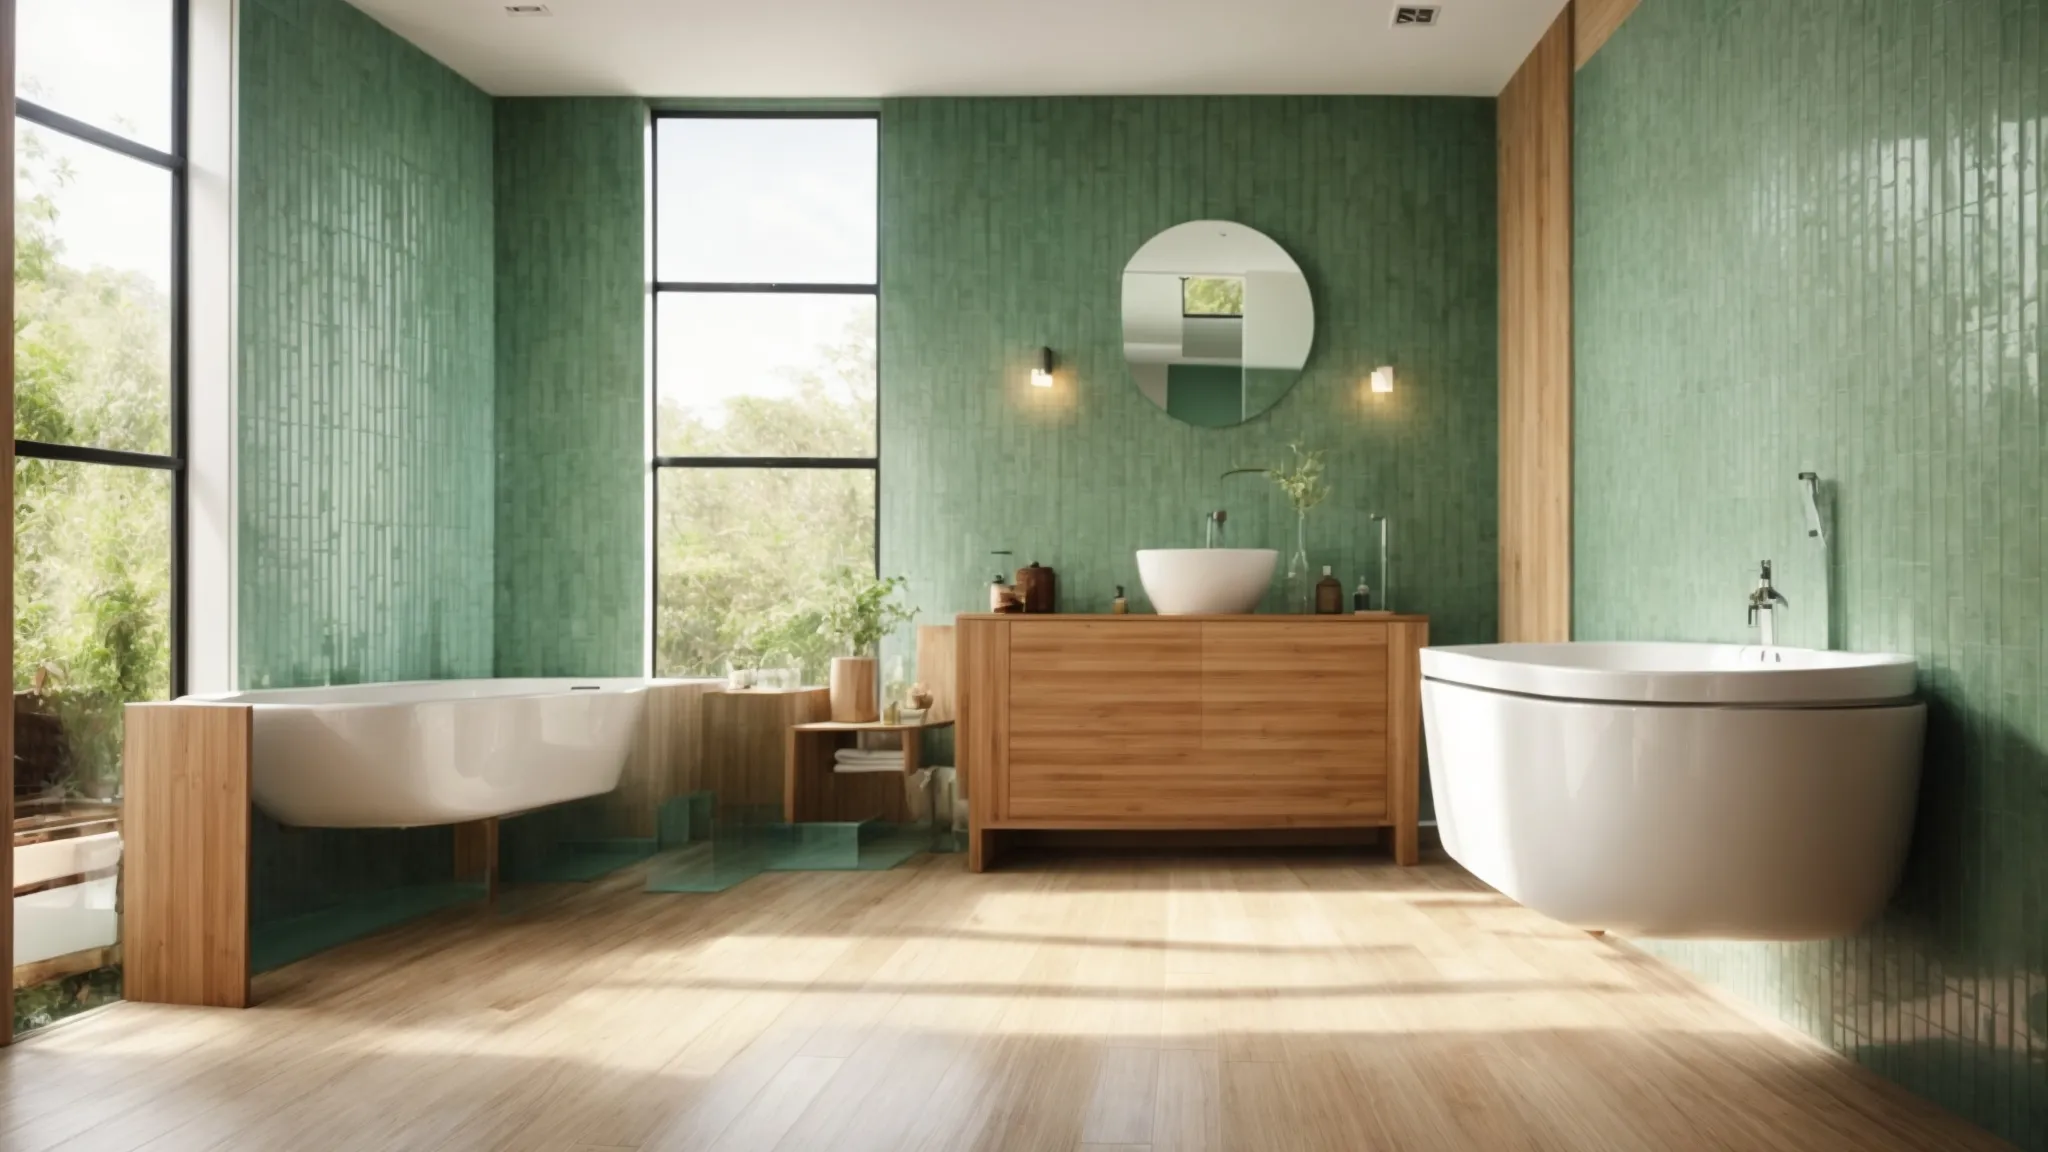 a spacious, bright bathroom with a bamboo floor and a recycled glass tile accent wall.